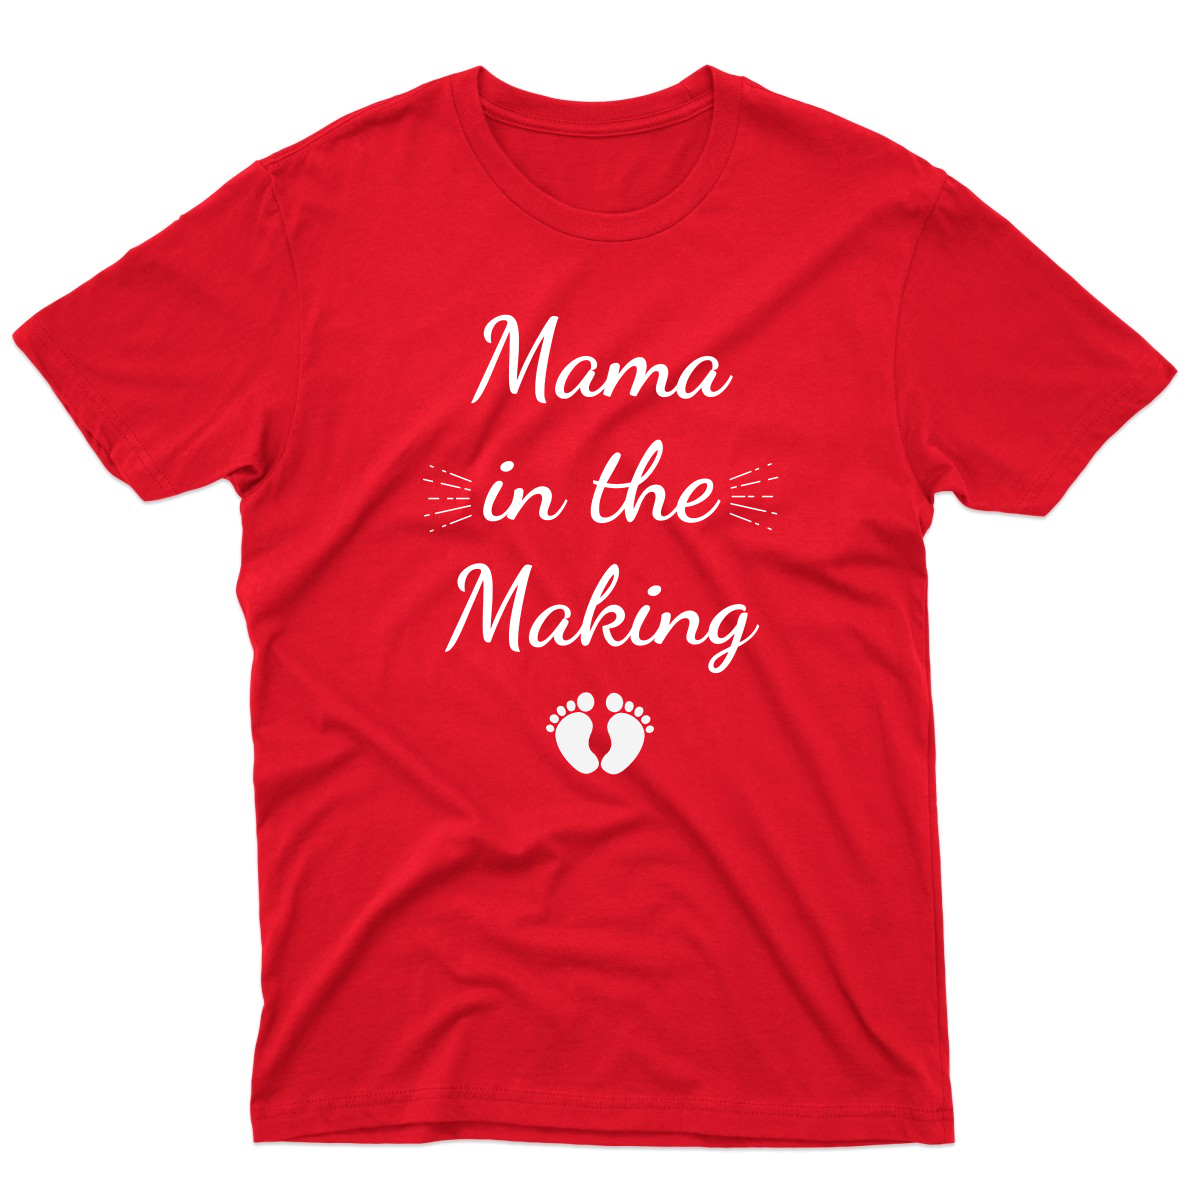 Mama in the Making Shirt Men's T-shirt | Red